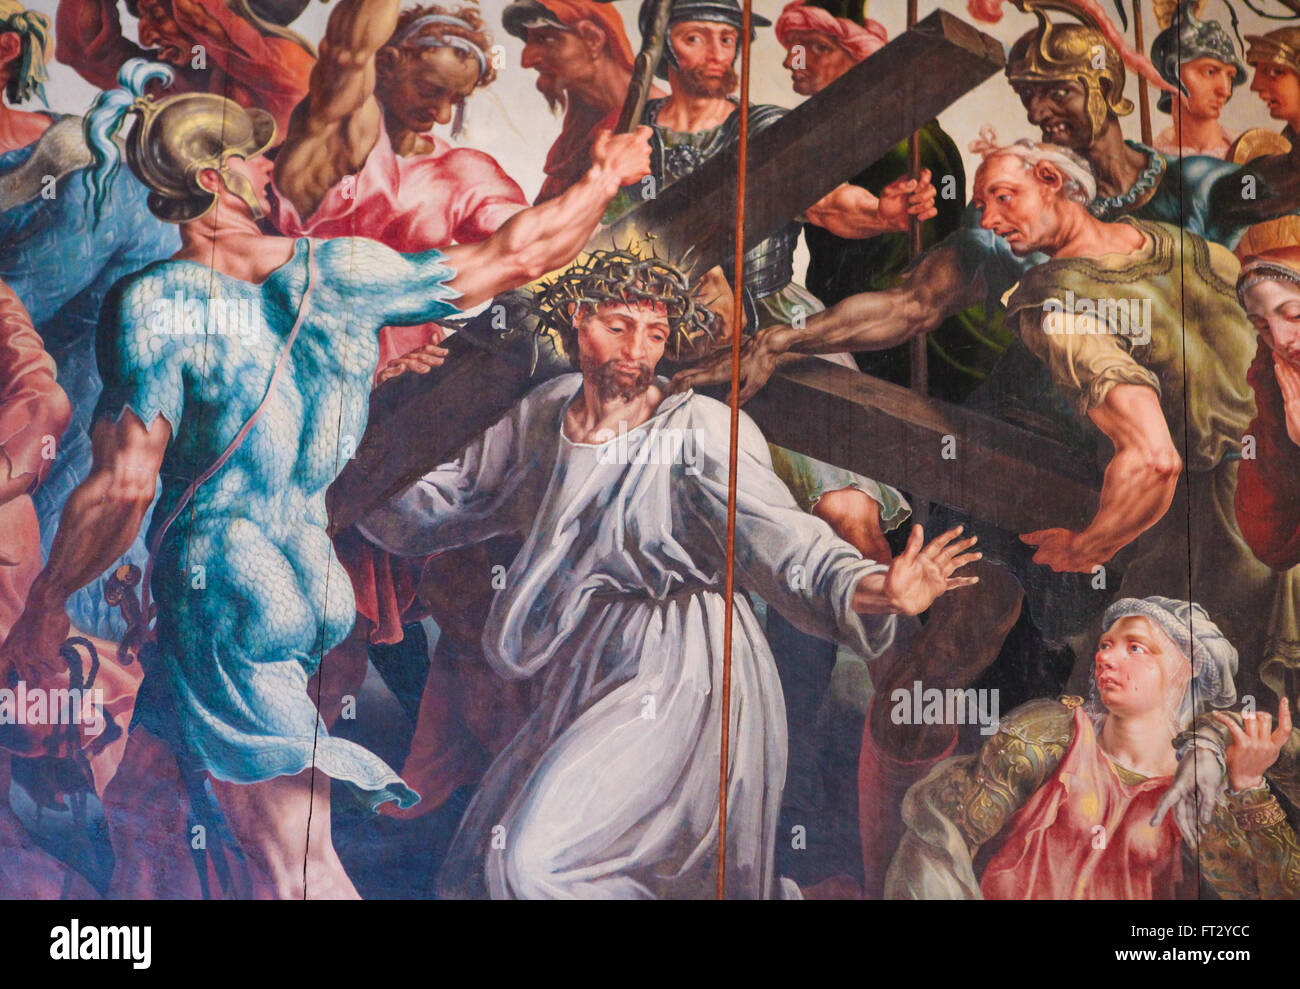 Jesus carrying the Cross on the Via Dolorosa - Painting in Linkoping Church, Sweden. Stock Photo